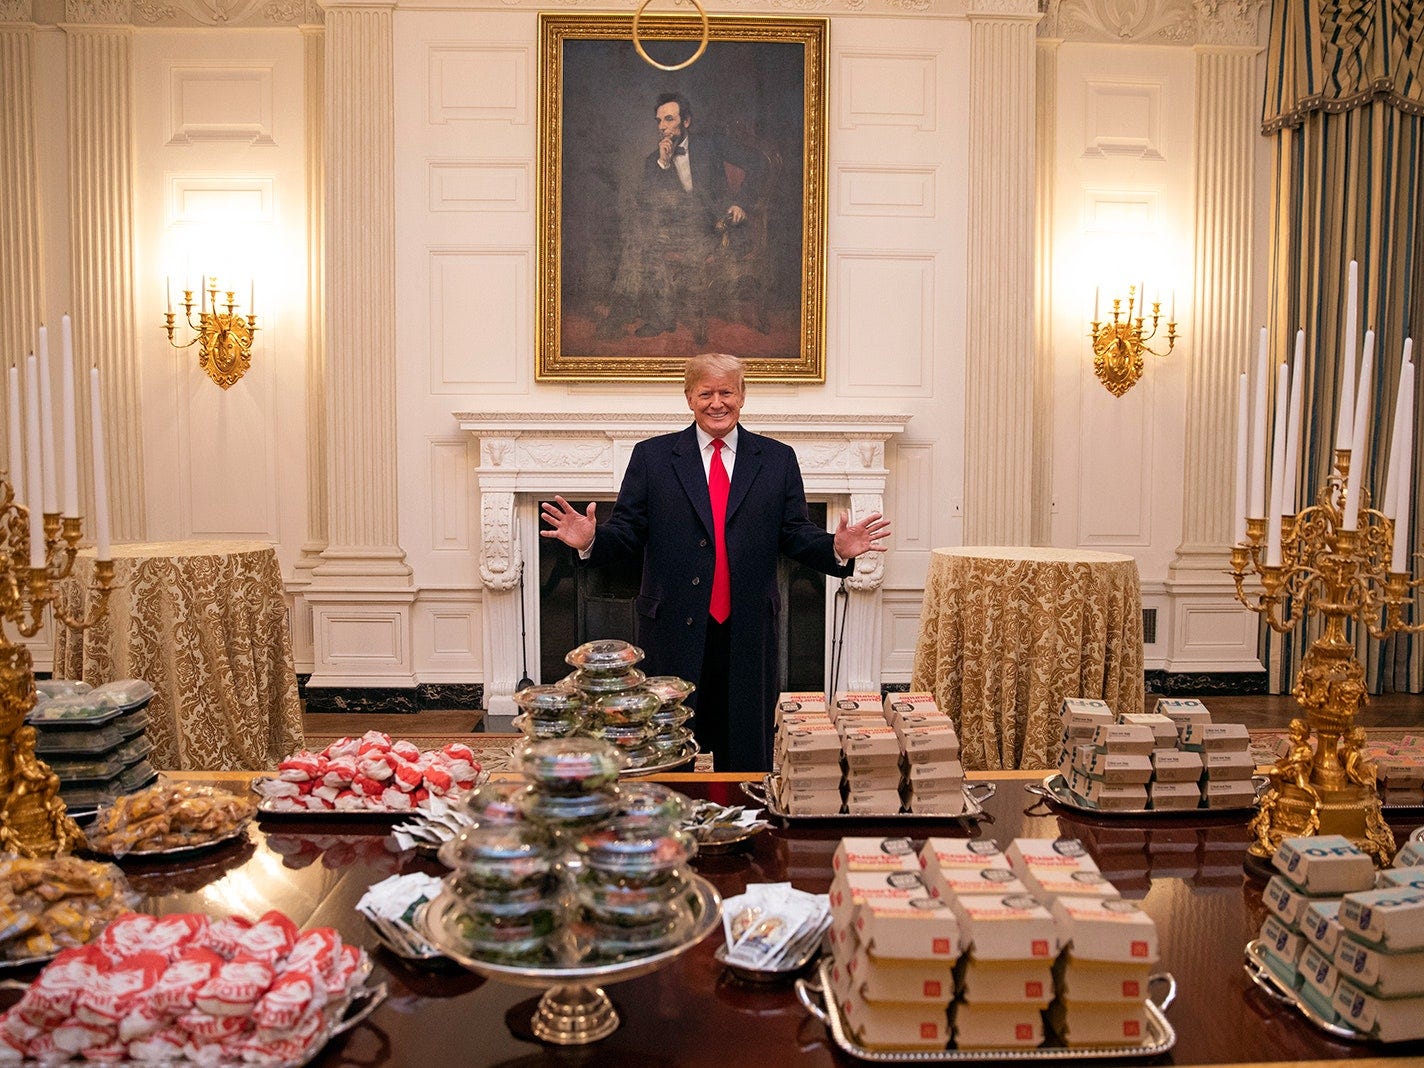 The Pure American Banality of Donald Trump's White House Fast-Food Buffet |  The New Yorker